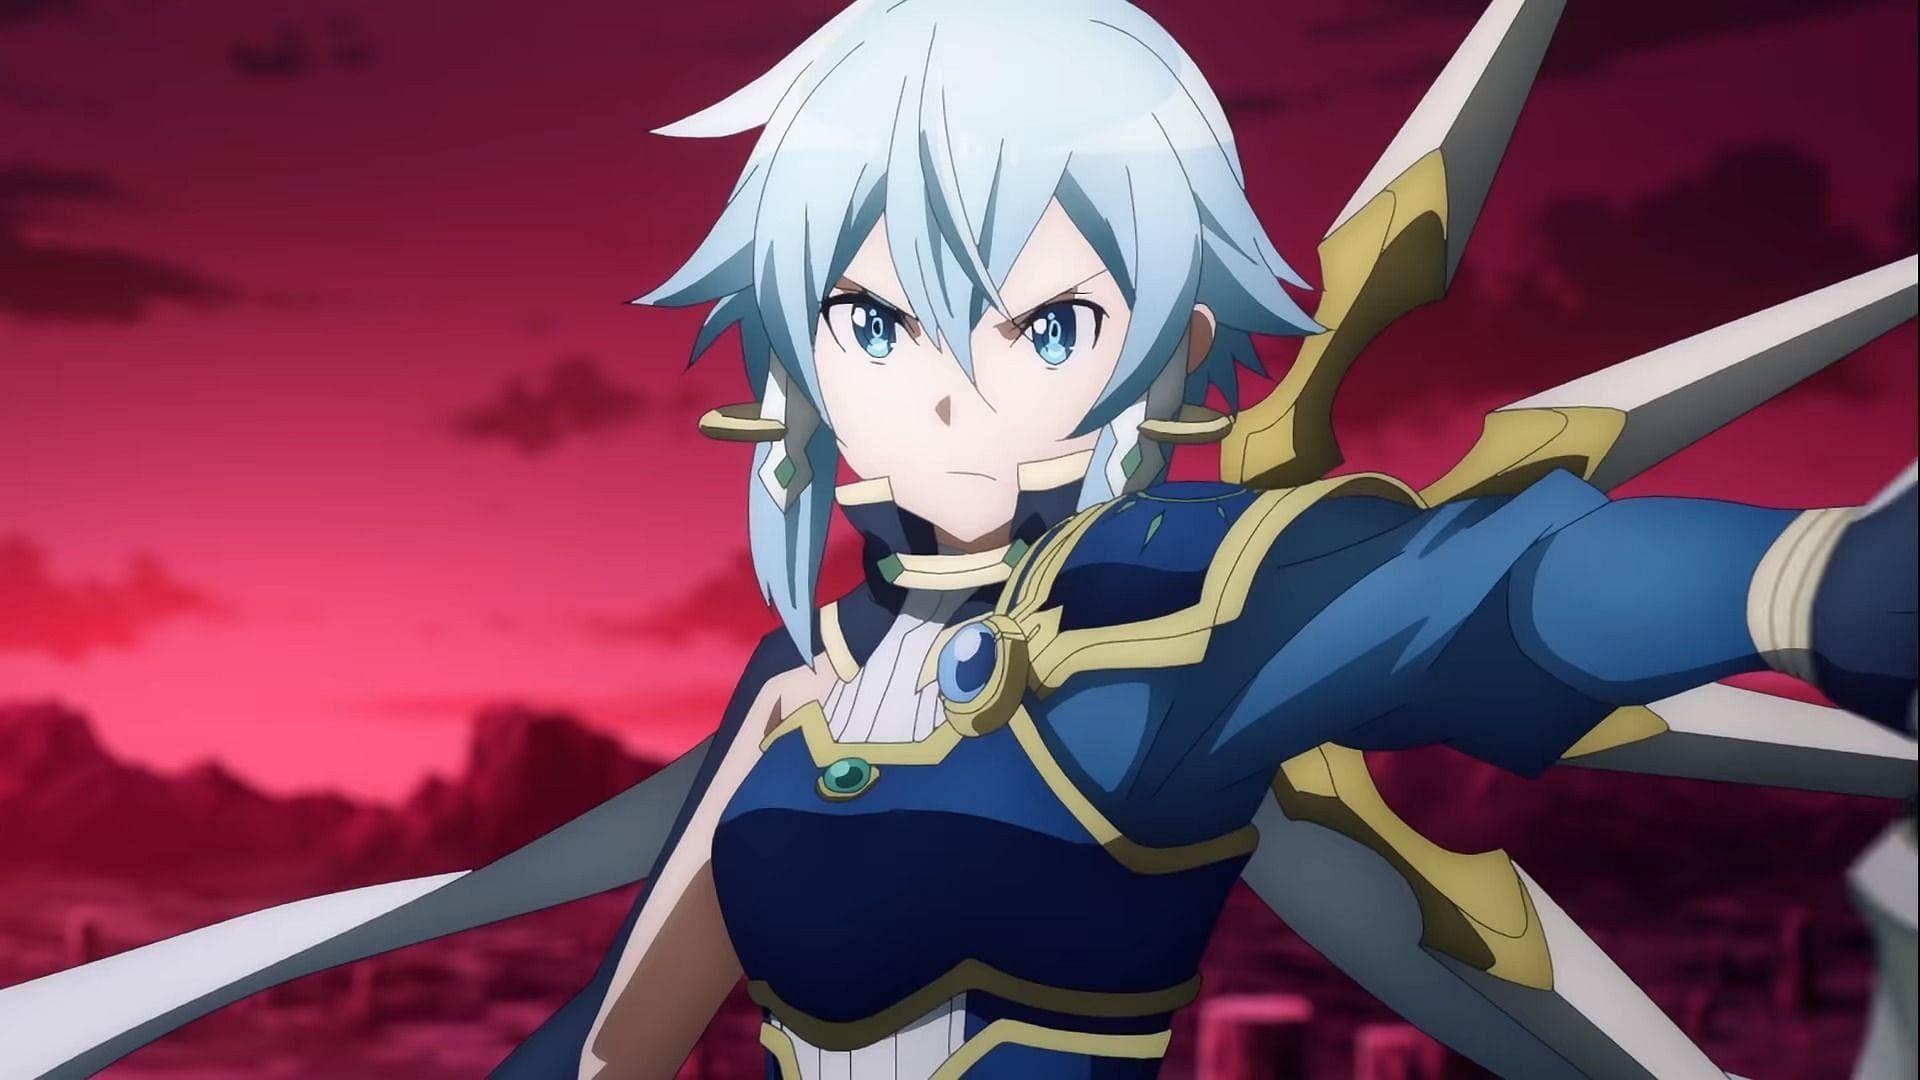 Sinon as she appears in the Goddess Solus account (Image Credit: Sword Art Online, Aniplex, A-1 Pictures)